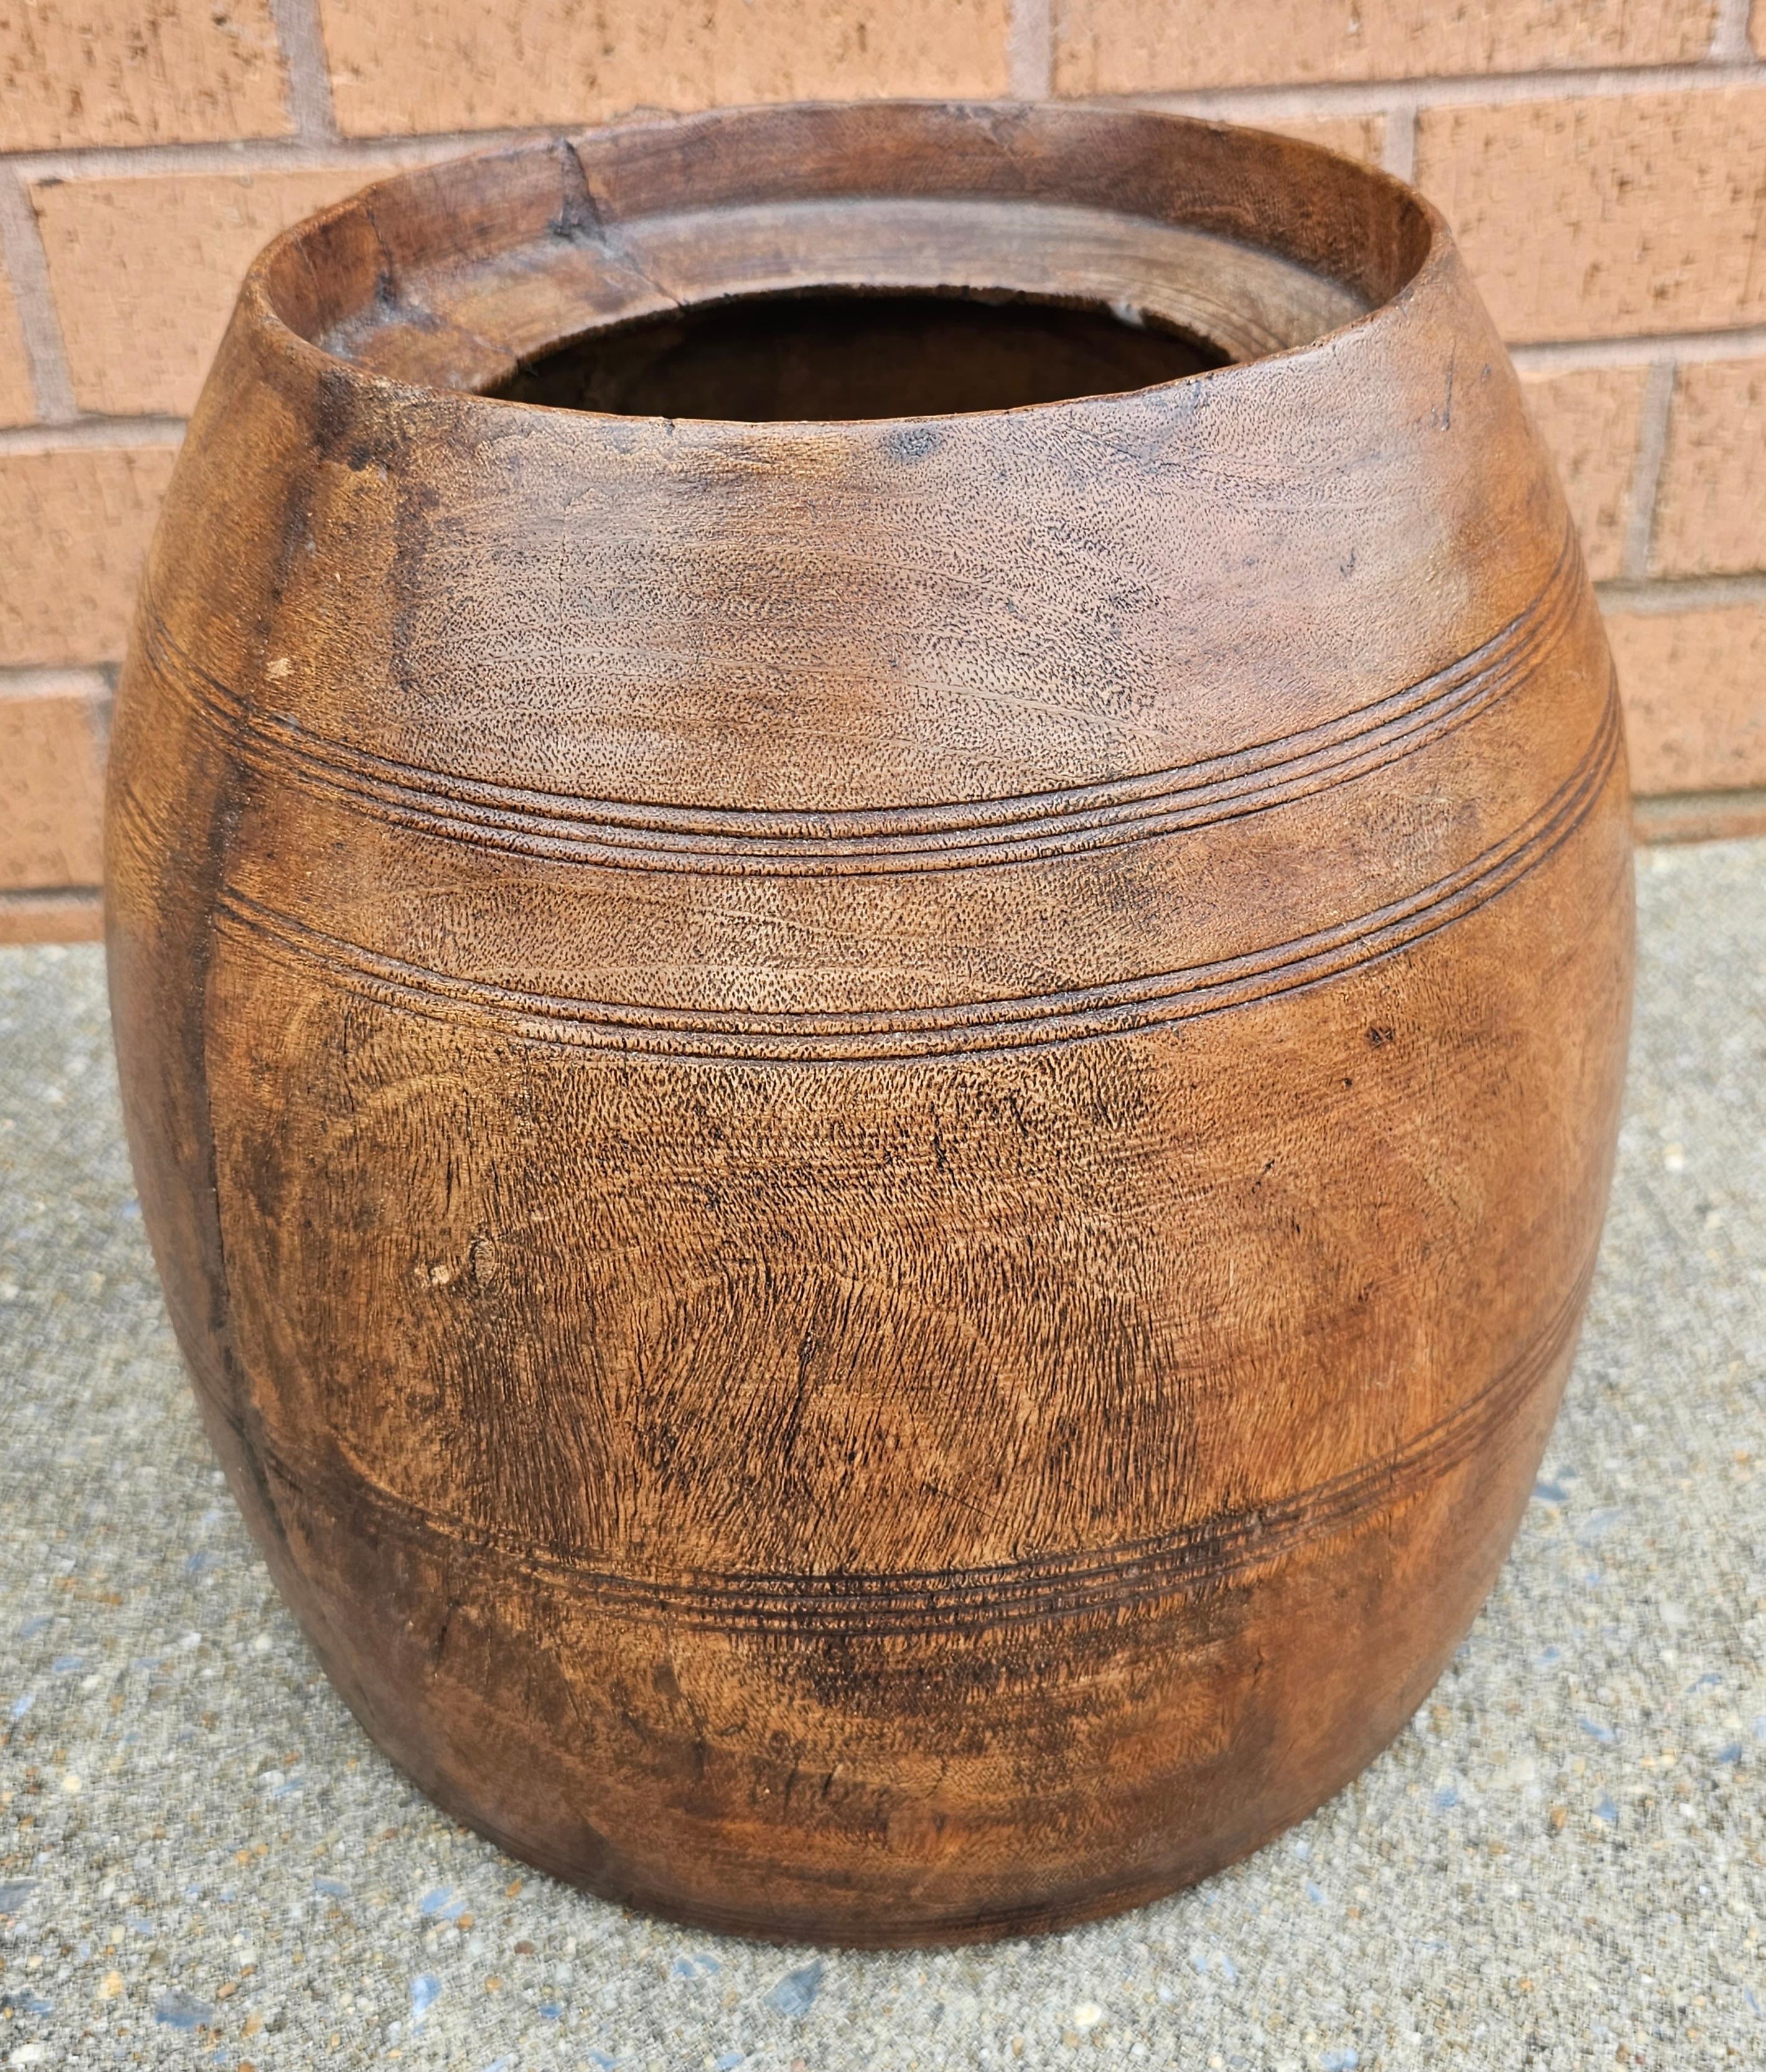 A well crafted Early 20th Century Handcrafted Turned Wooden Honey or Rice Pot, Nowadays used as a Planter. Truly one of a kind piece to bring originality and visibility to you plant. Measures 11